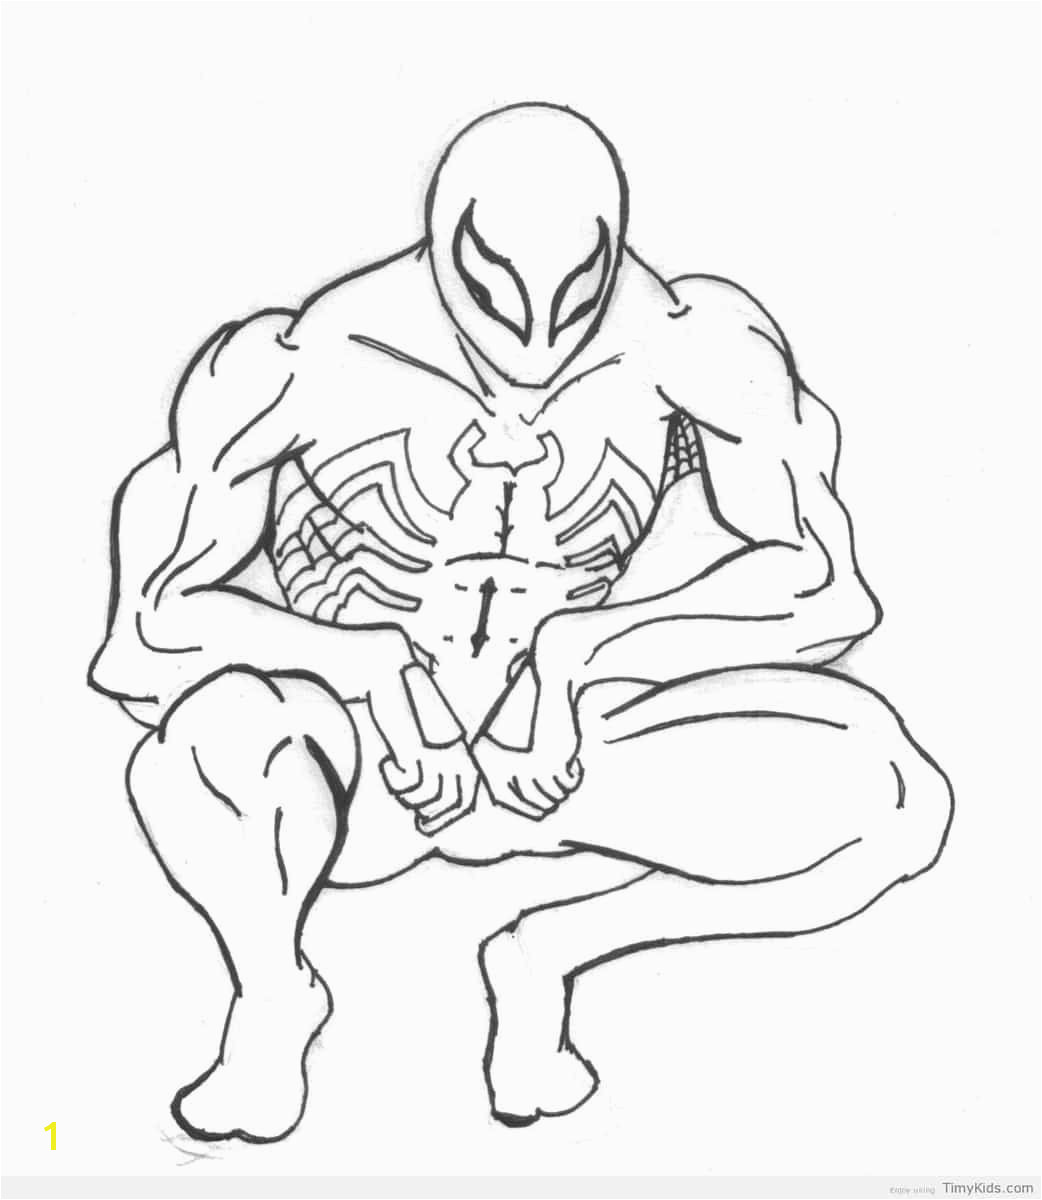 Black Spiderman Coloring Pages With Http Timykids Suit Html